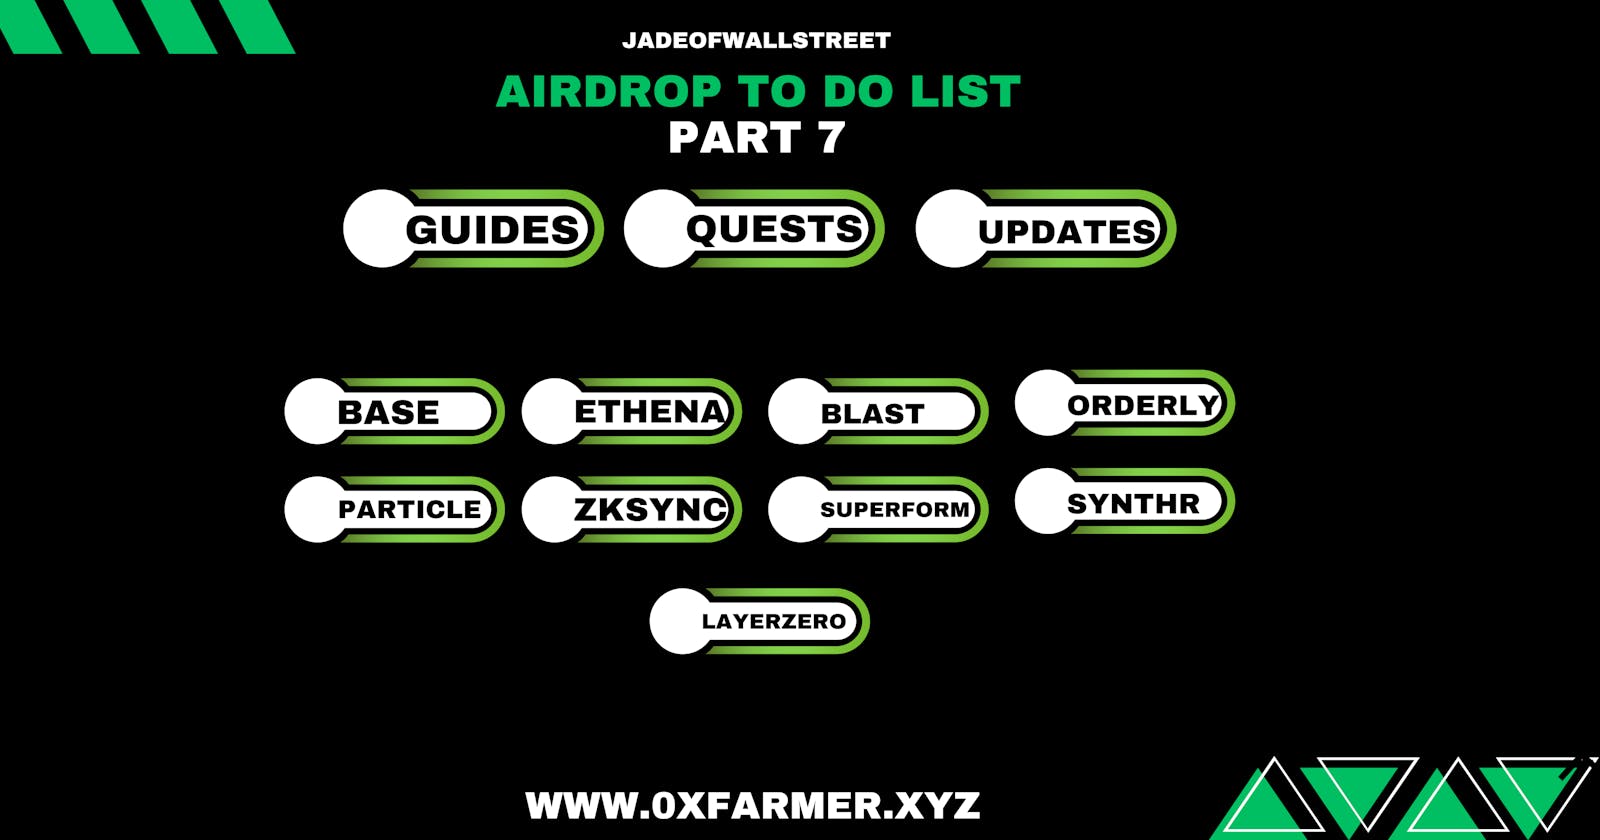 Airdrop To Do List Part 7 Quests & Guides